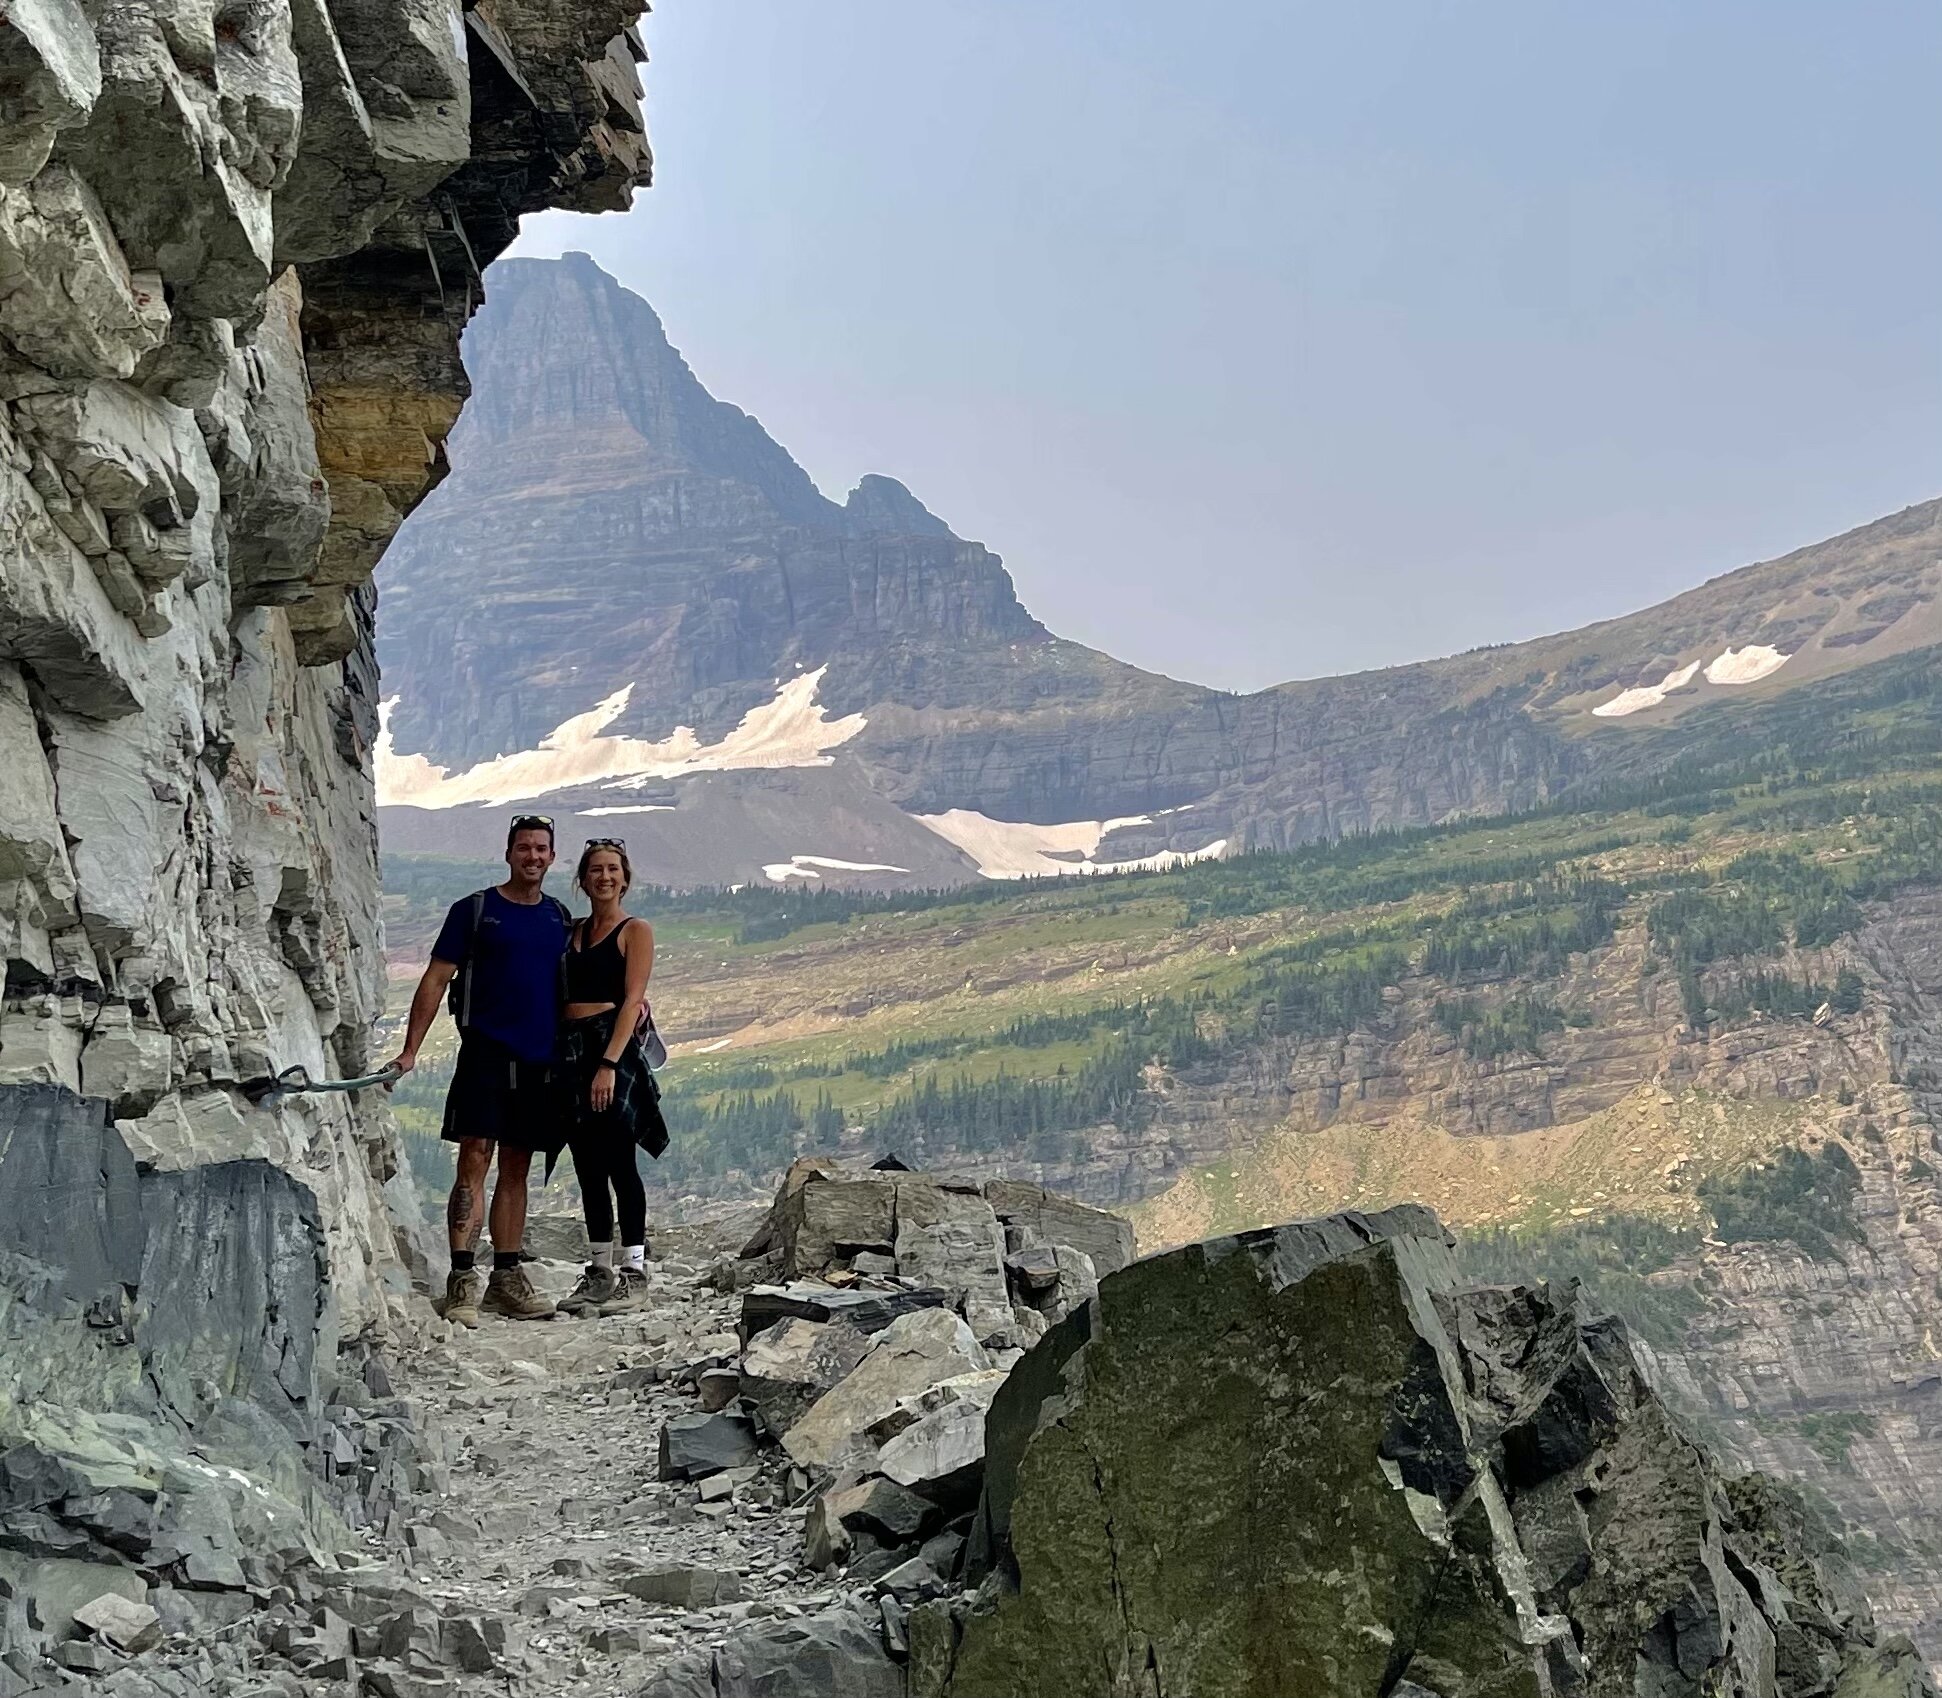  It was great to have our son and daughter-in-law, Kevin and Rachel, join us for over a week.  Here, they’re hiking on the  Highline Trail  in  Glacier National Park.   